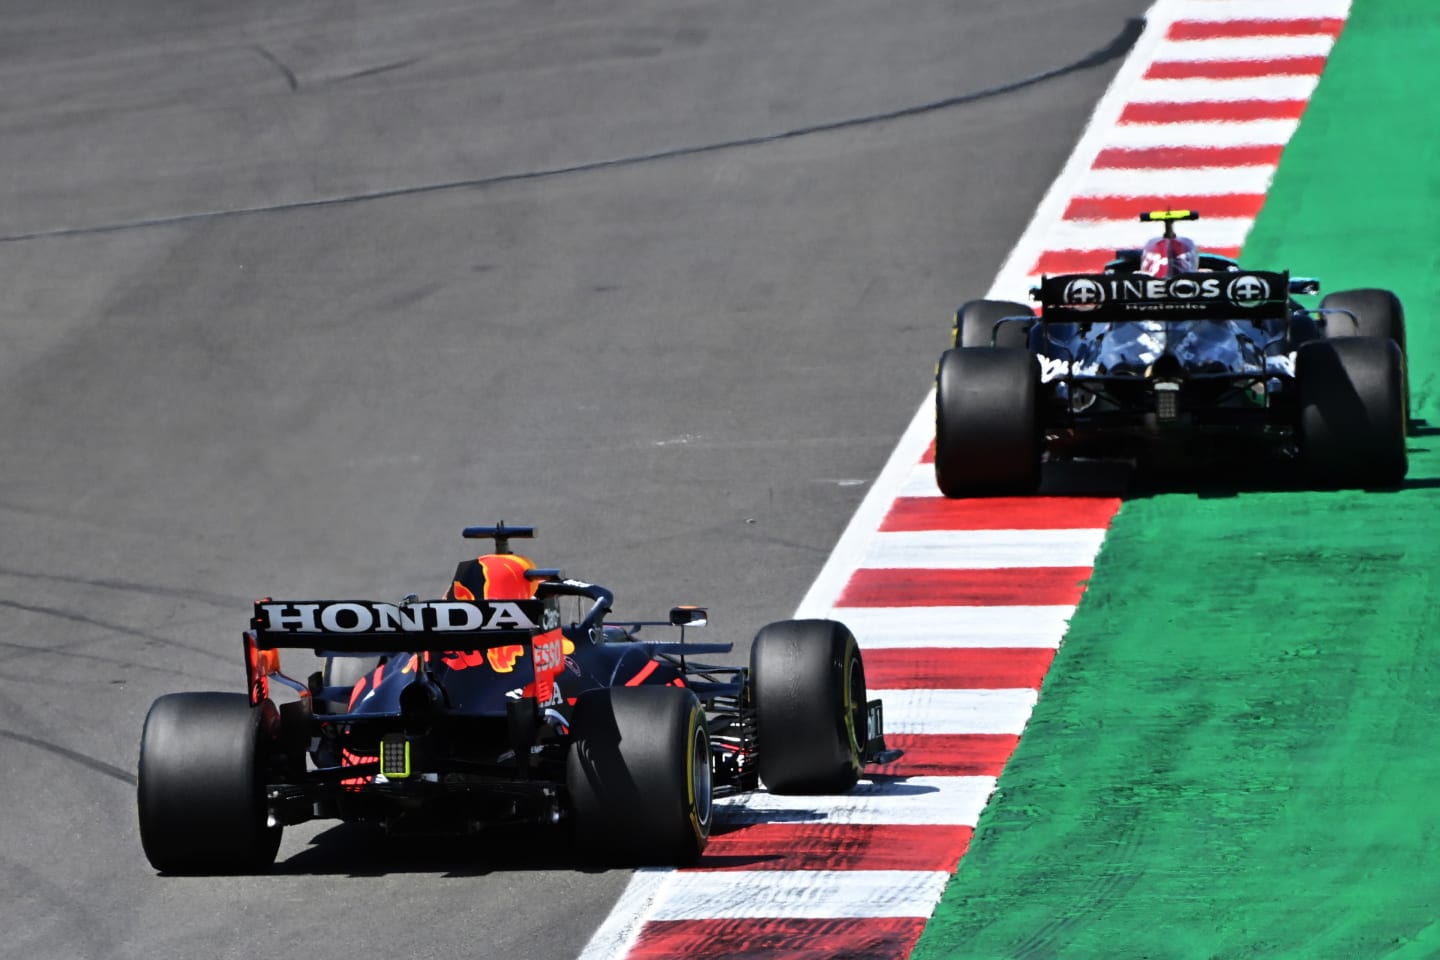 PORTIMAO, PORTUGAL - MAY 02: Max Verstappen of the Netherlands driving the (33) Red Bull Racing